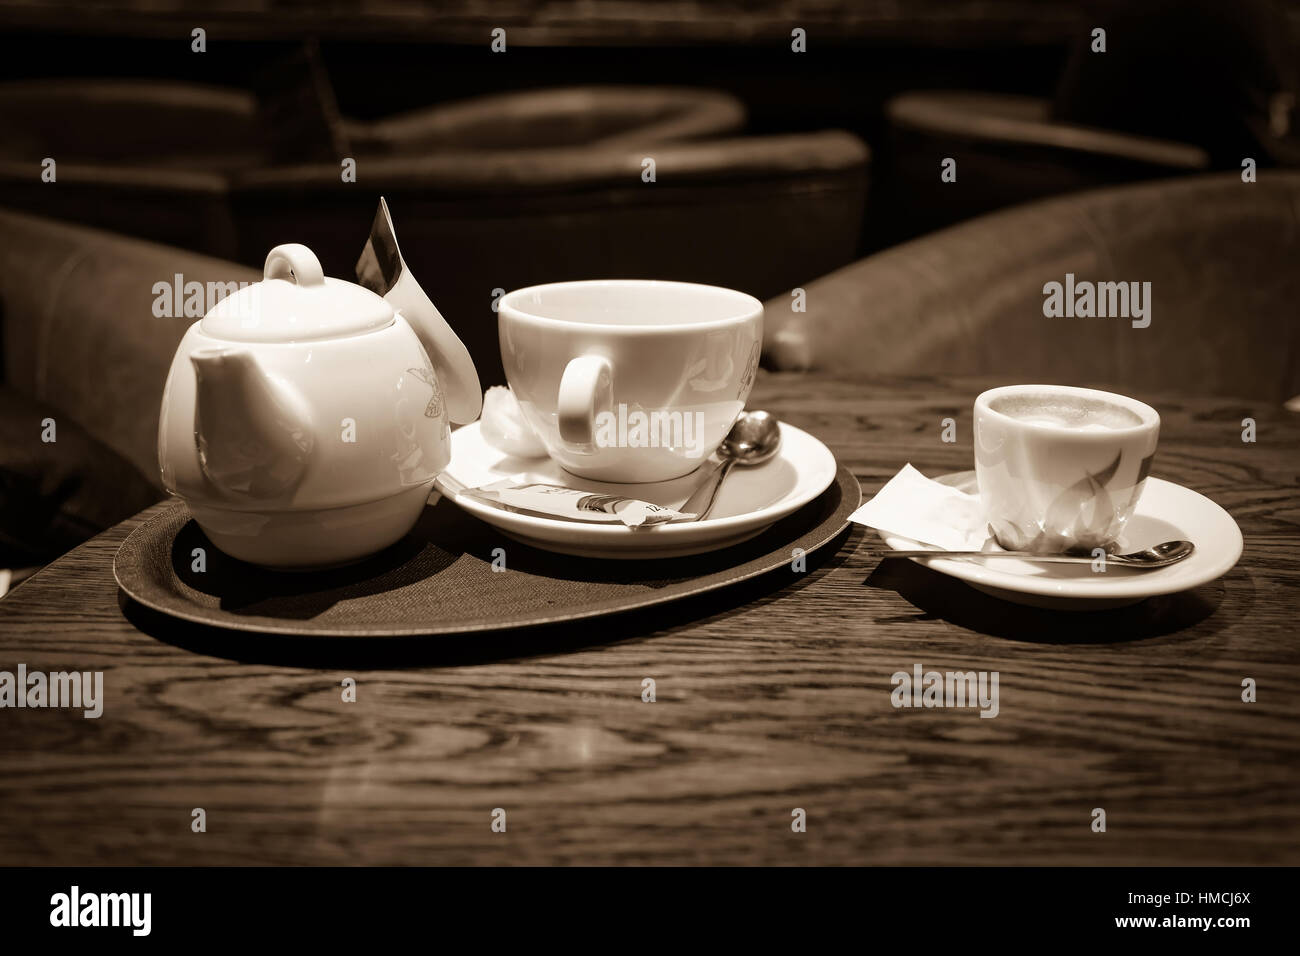 cup of coffee and tea on bar table, sepia toned Stock Photo